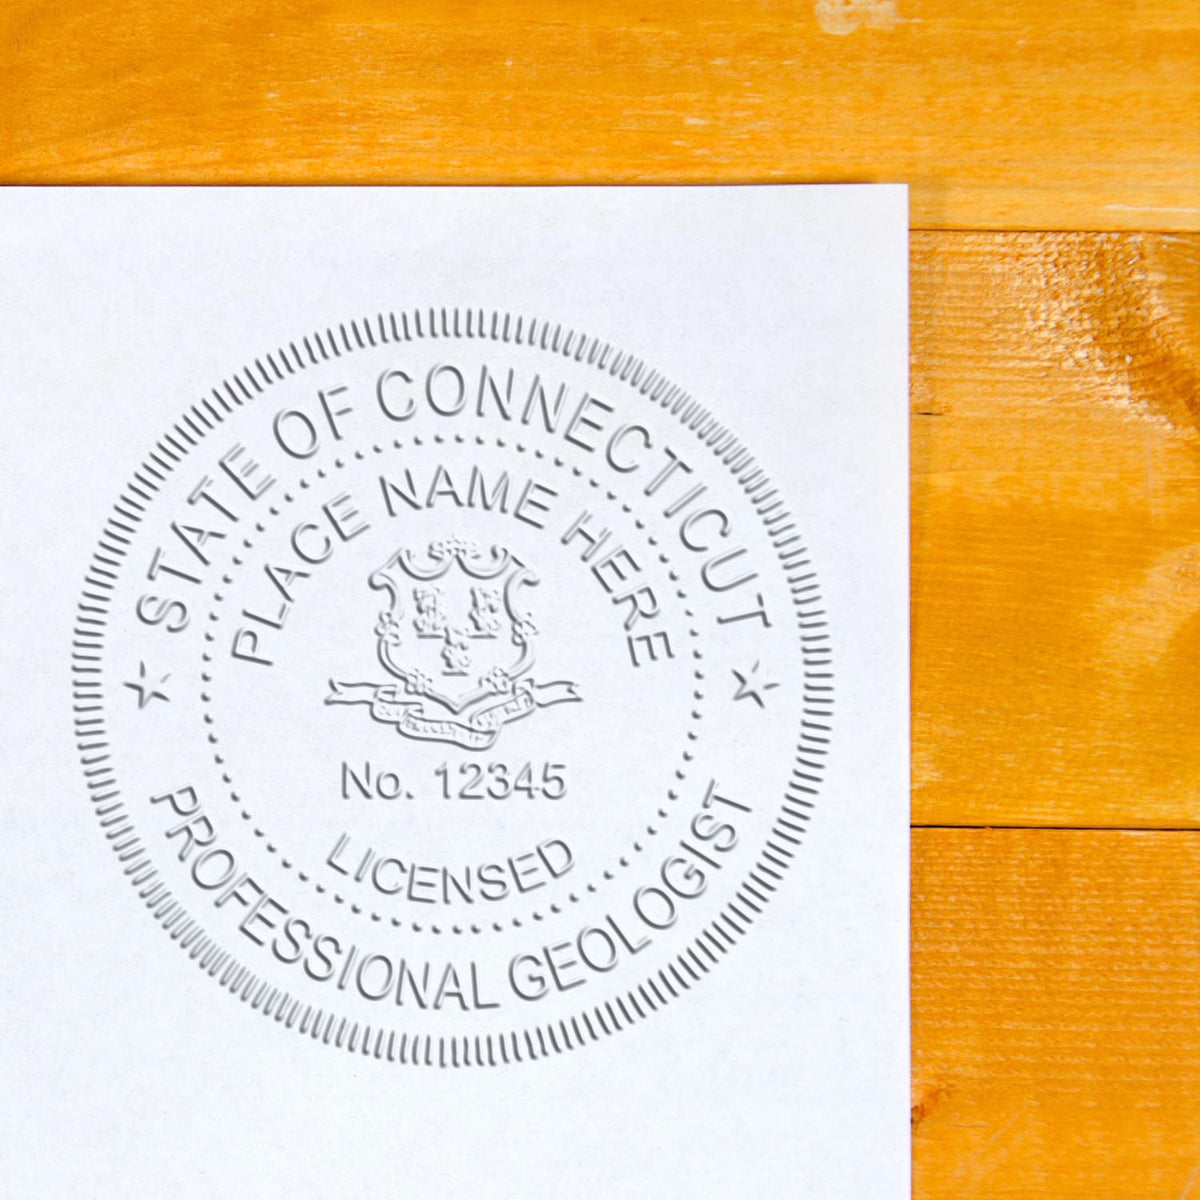 An in use photo of the Gift Connecticut Geologist Seal showing a sample imprint on a cardstock